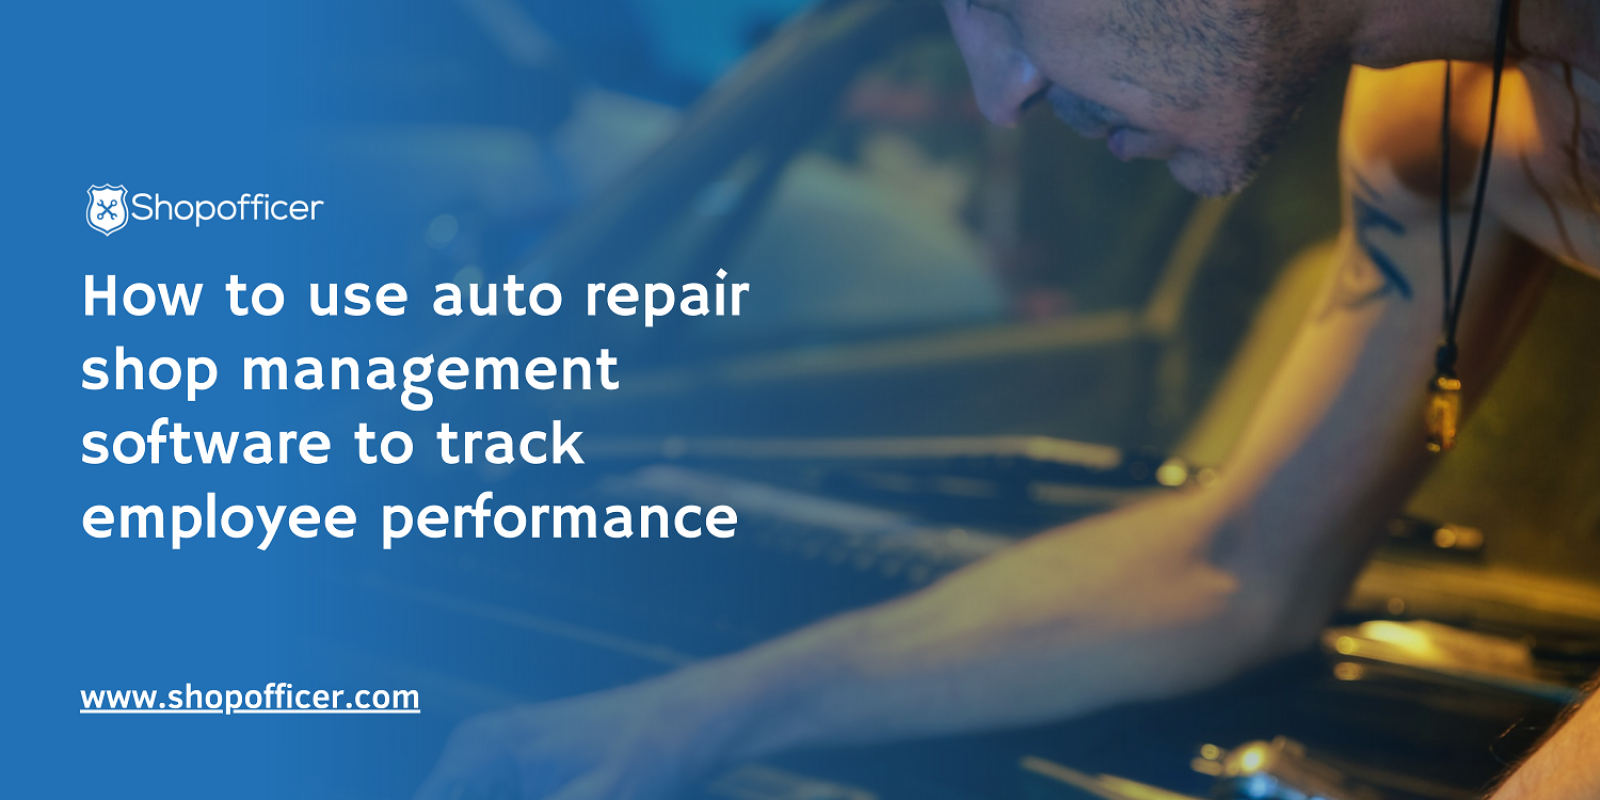 How to use auto repair shop management software to track employee performance